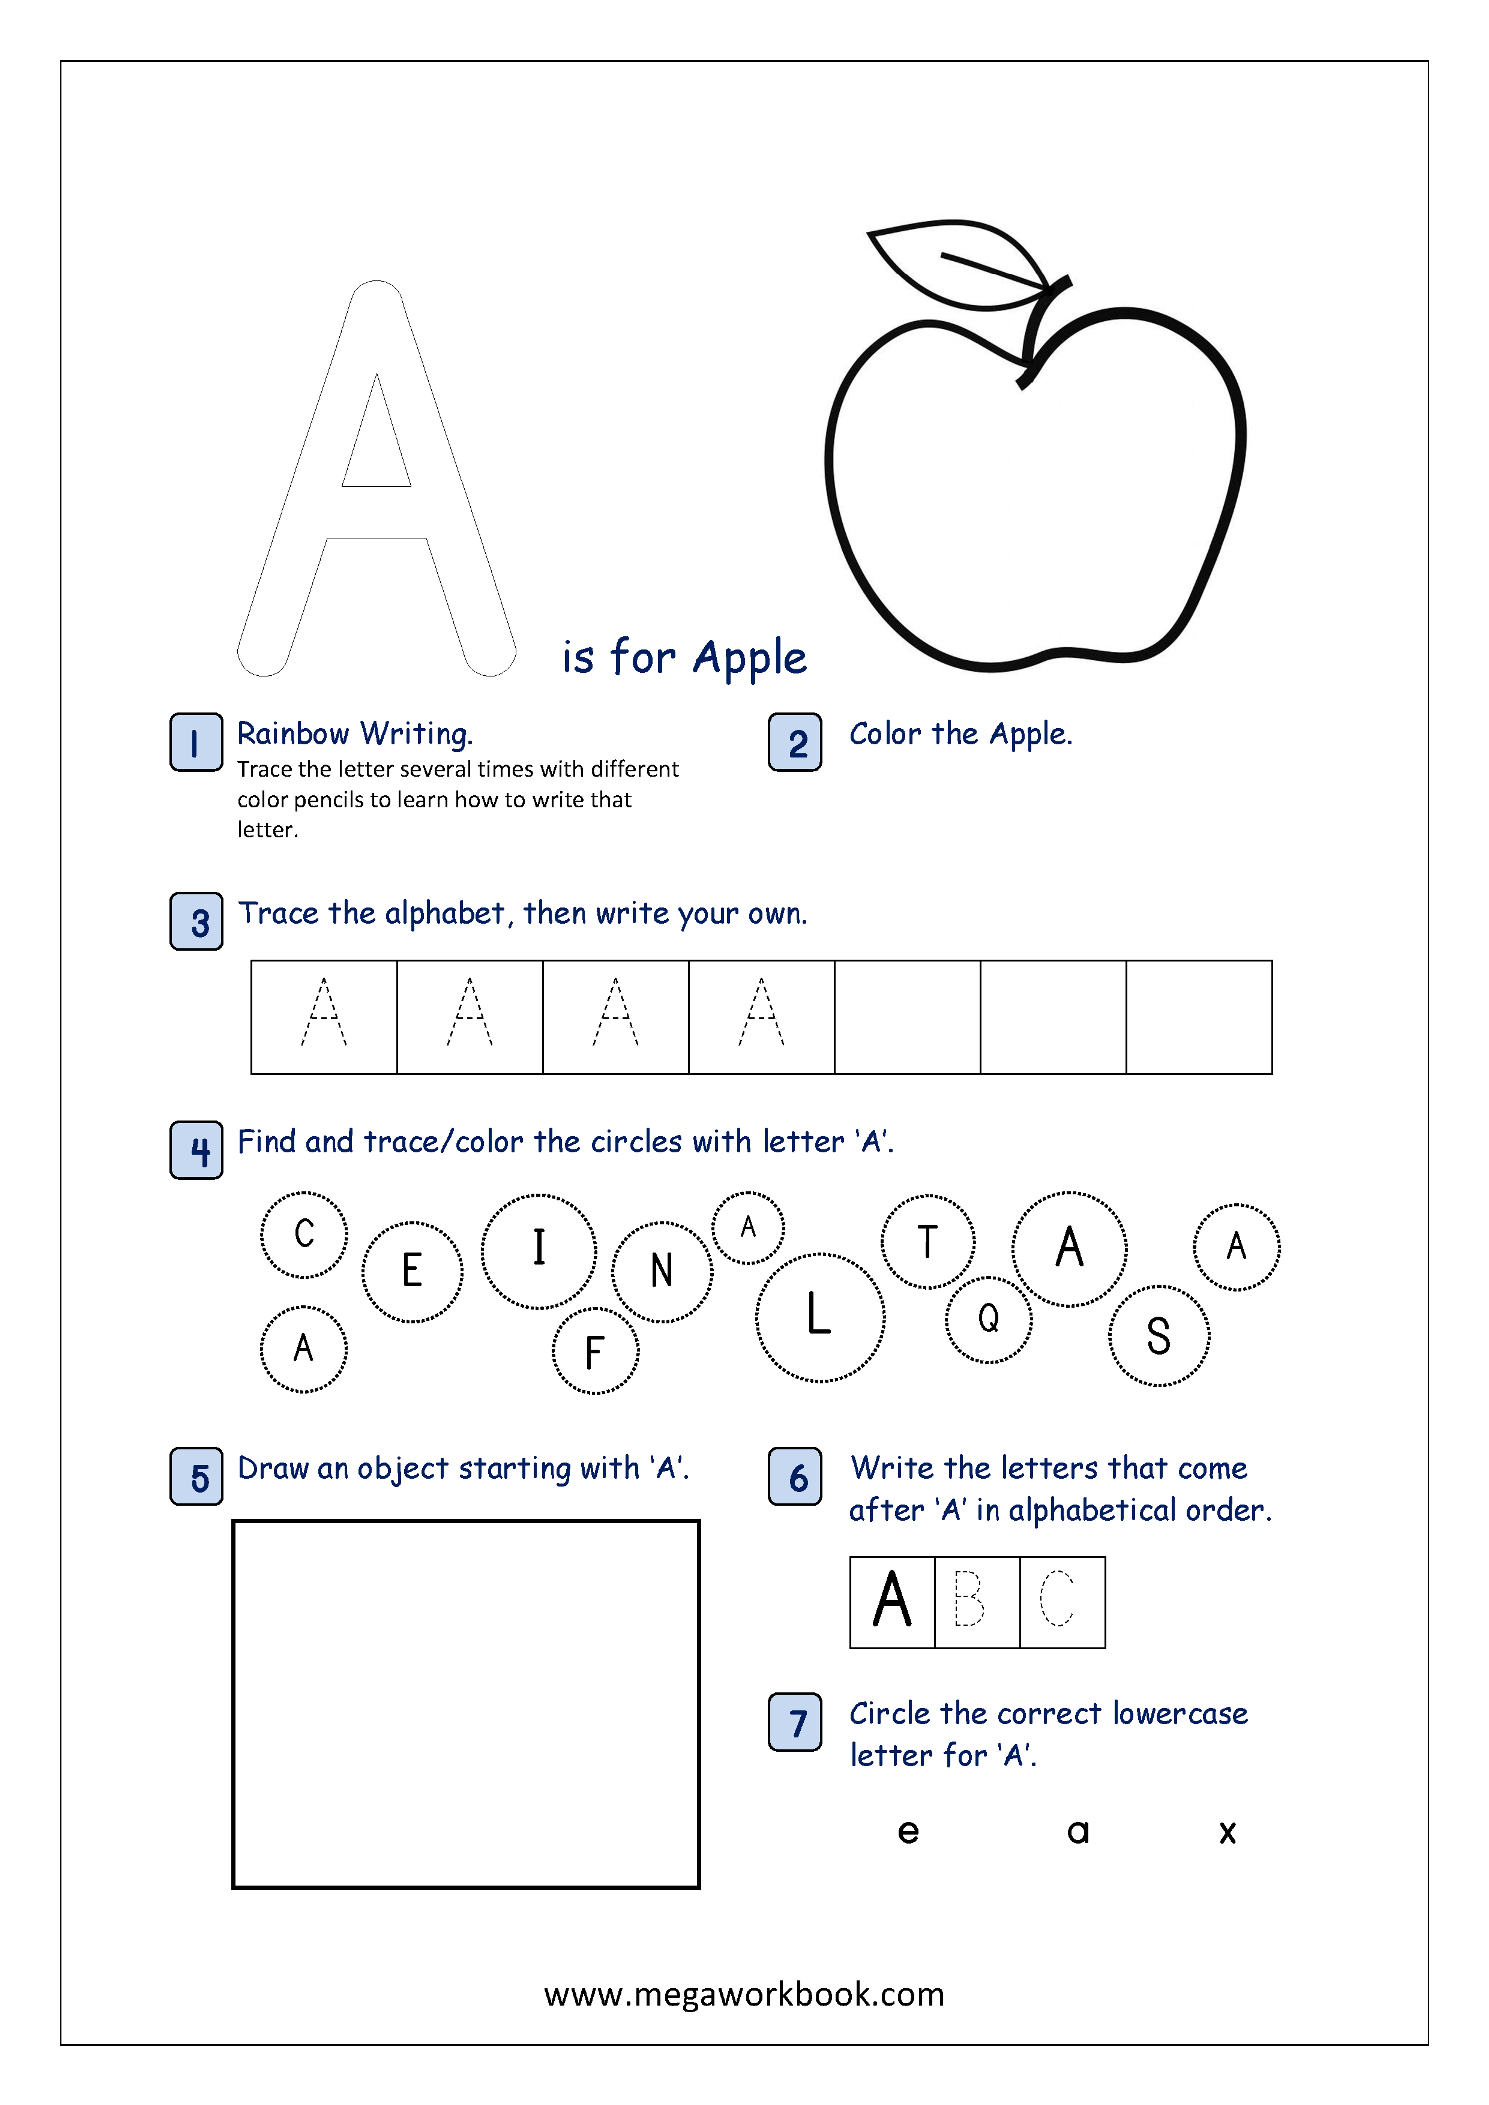 Free Printable Alphabet Recognition Worksheets For Capital Letters With Preschool Letter Recognition Worksheets